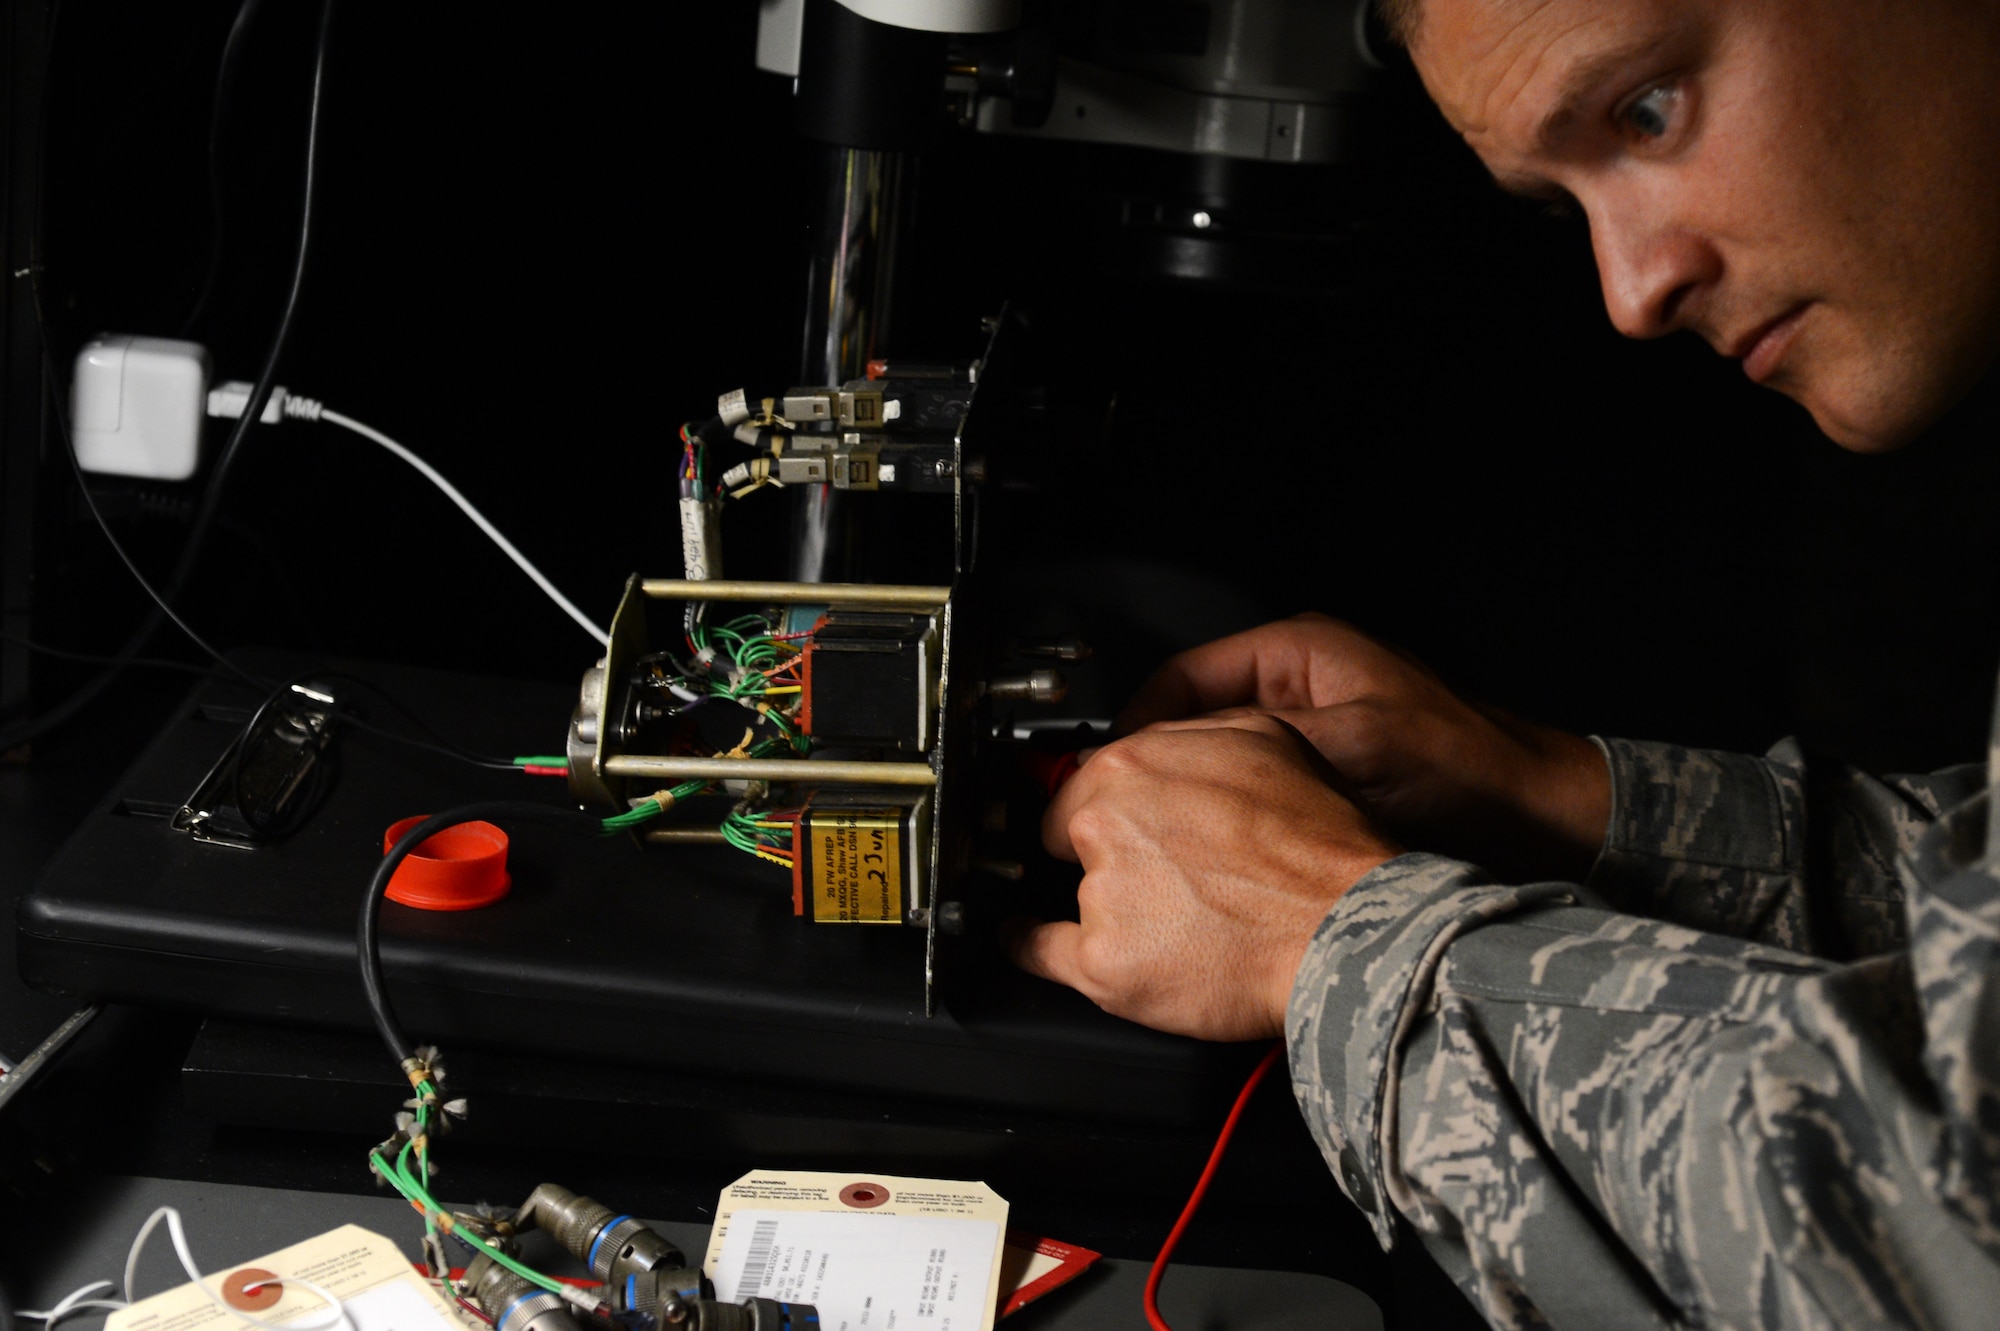 U.S. Air Force Tech. Sgt. Scott Williams, 20th Maintenance Group Air Force Repair Enhancement Program technician, connects a landing gear panel from an F-16CM Fighting Falcon up to power to test the LED lights at Shaw Air Force Base, S.C., June 3, 2015. Williams and two other Airmen have saved the 20th MXG more than $61,000 on landing gear panel repairs alone in fiscal year 2015. (U.S. Air Force photo by Senior Airman Jonathan Bass/Released)